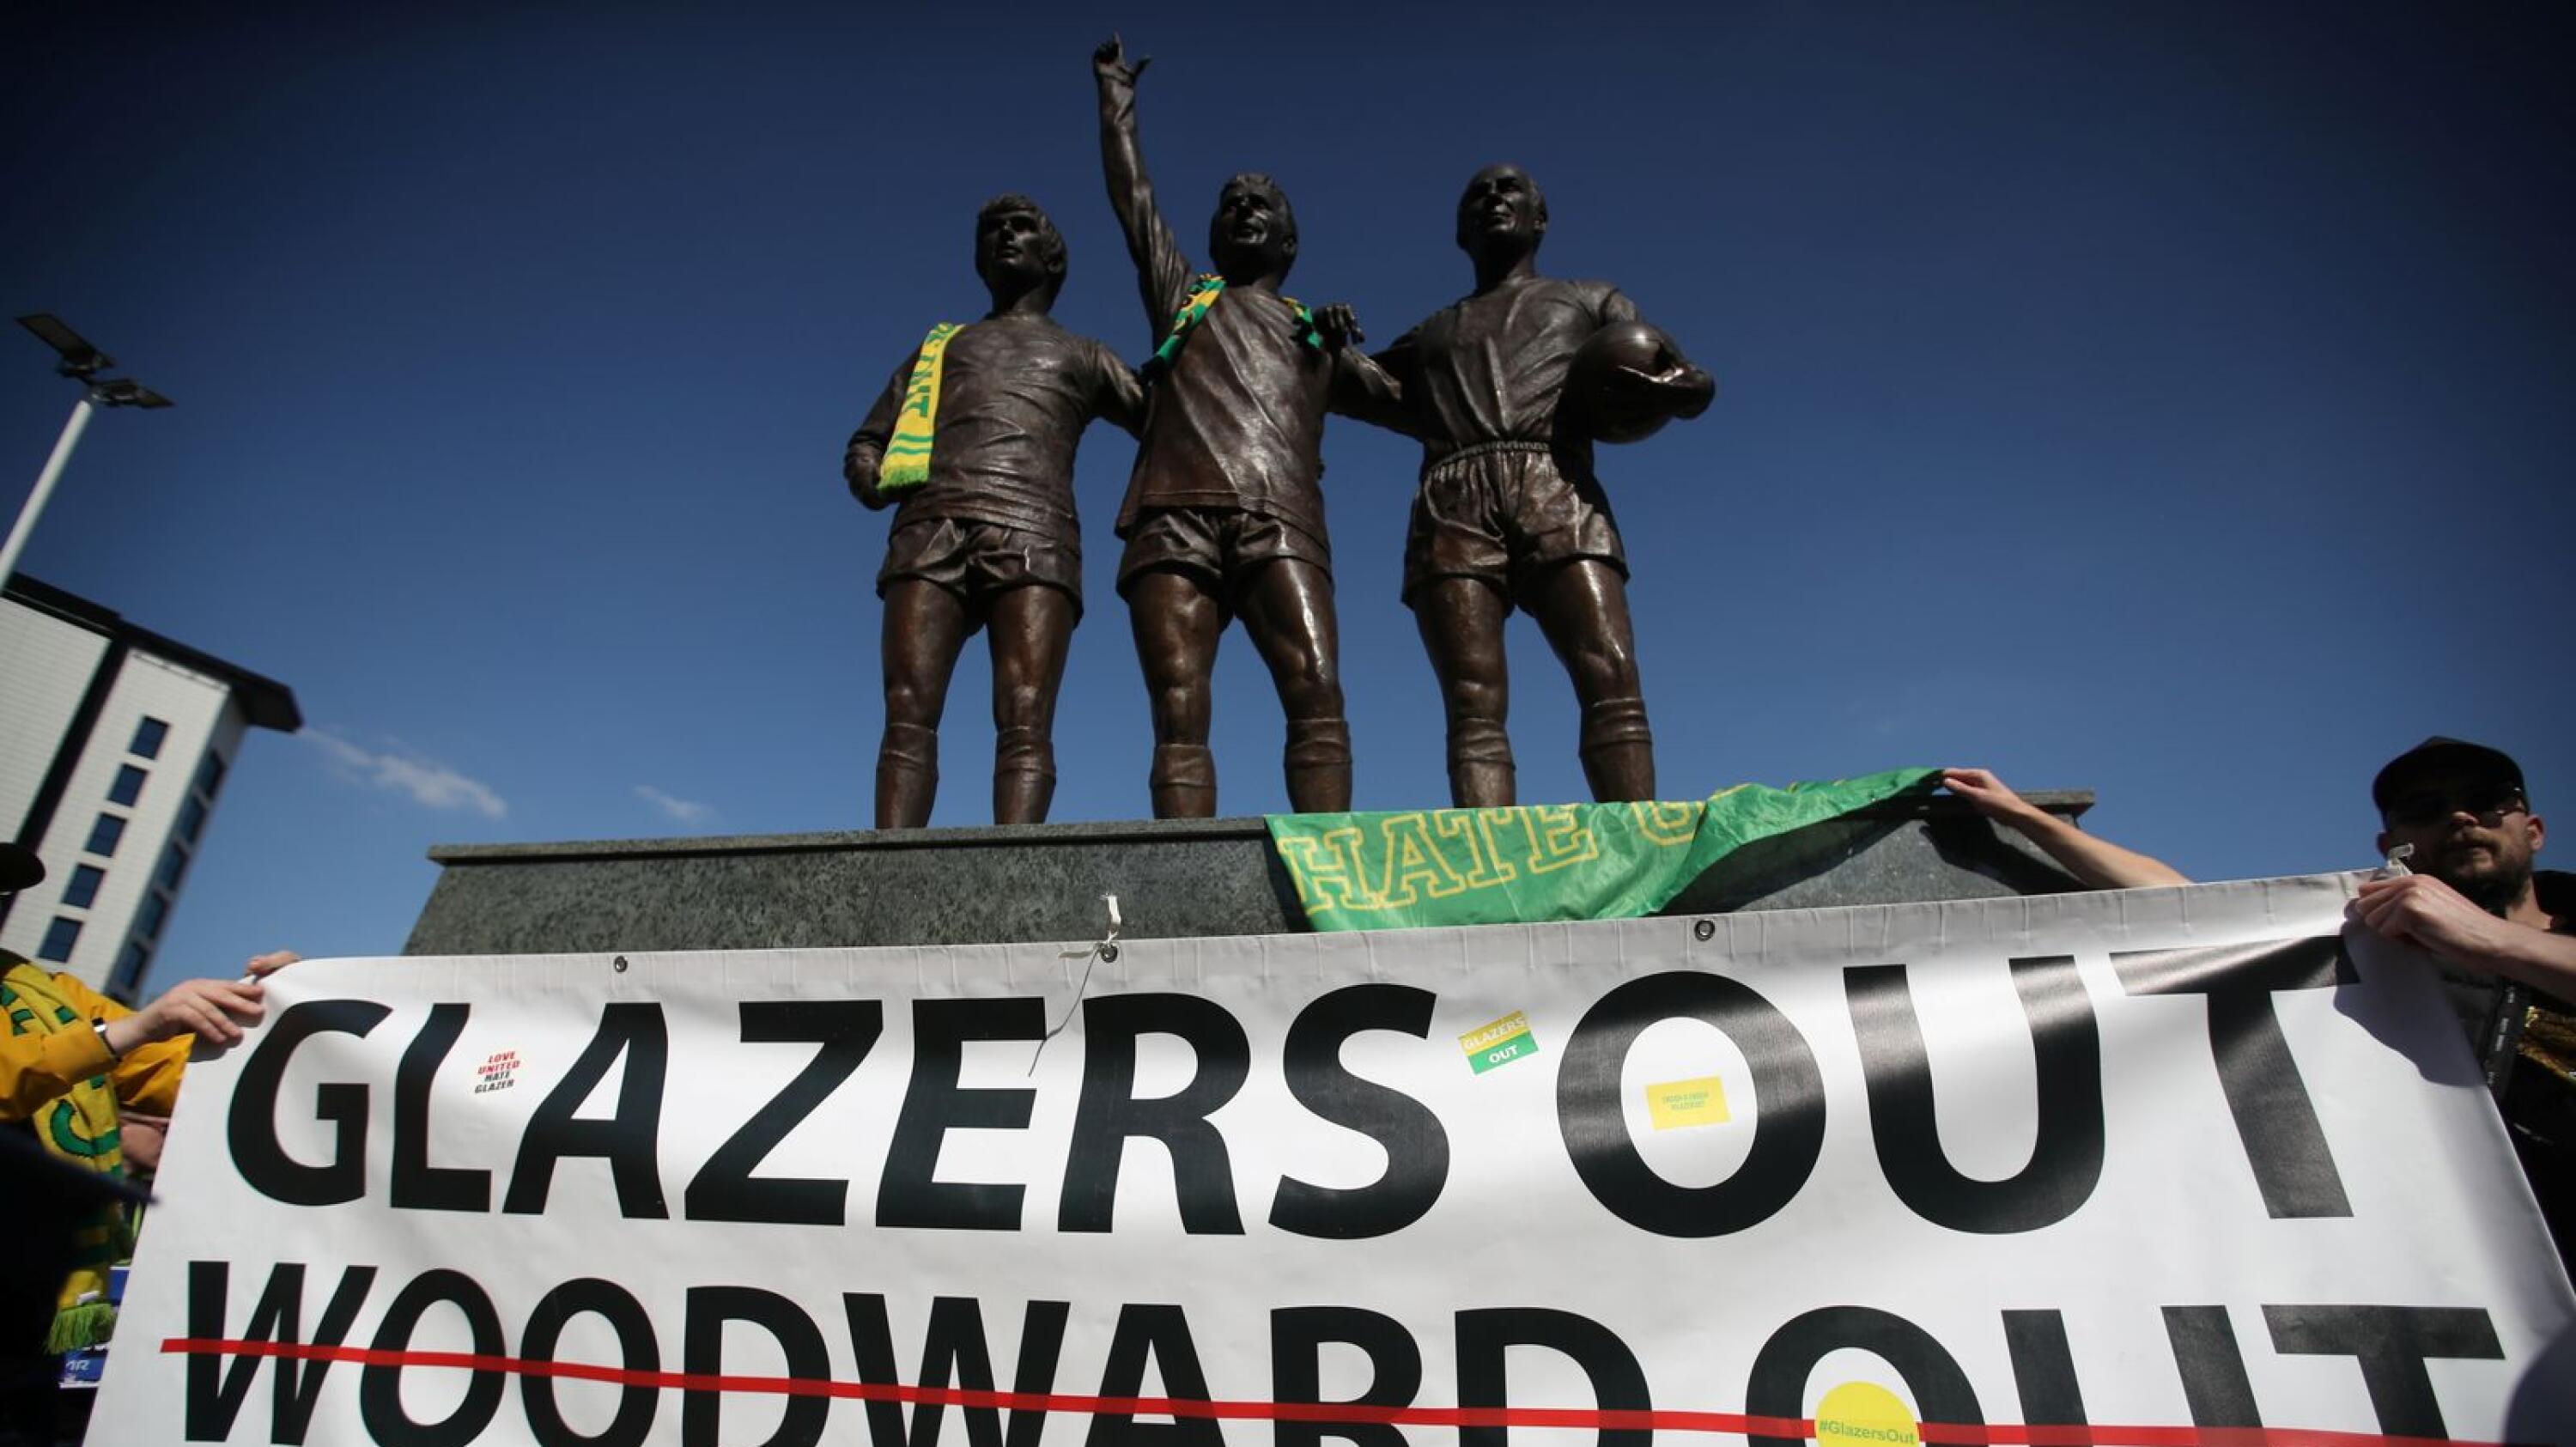 Manchester United are planning a protest against the Glazer family at the club’s ground ahead of this weekend’s Premier League game against Norwich City